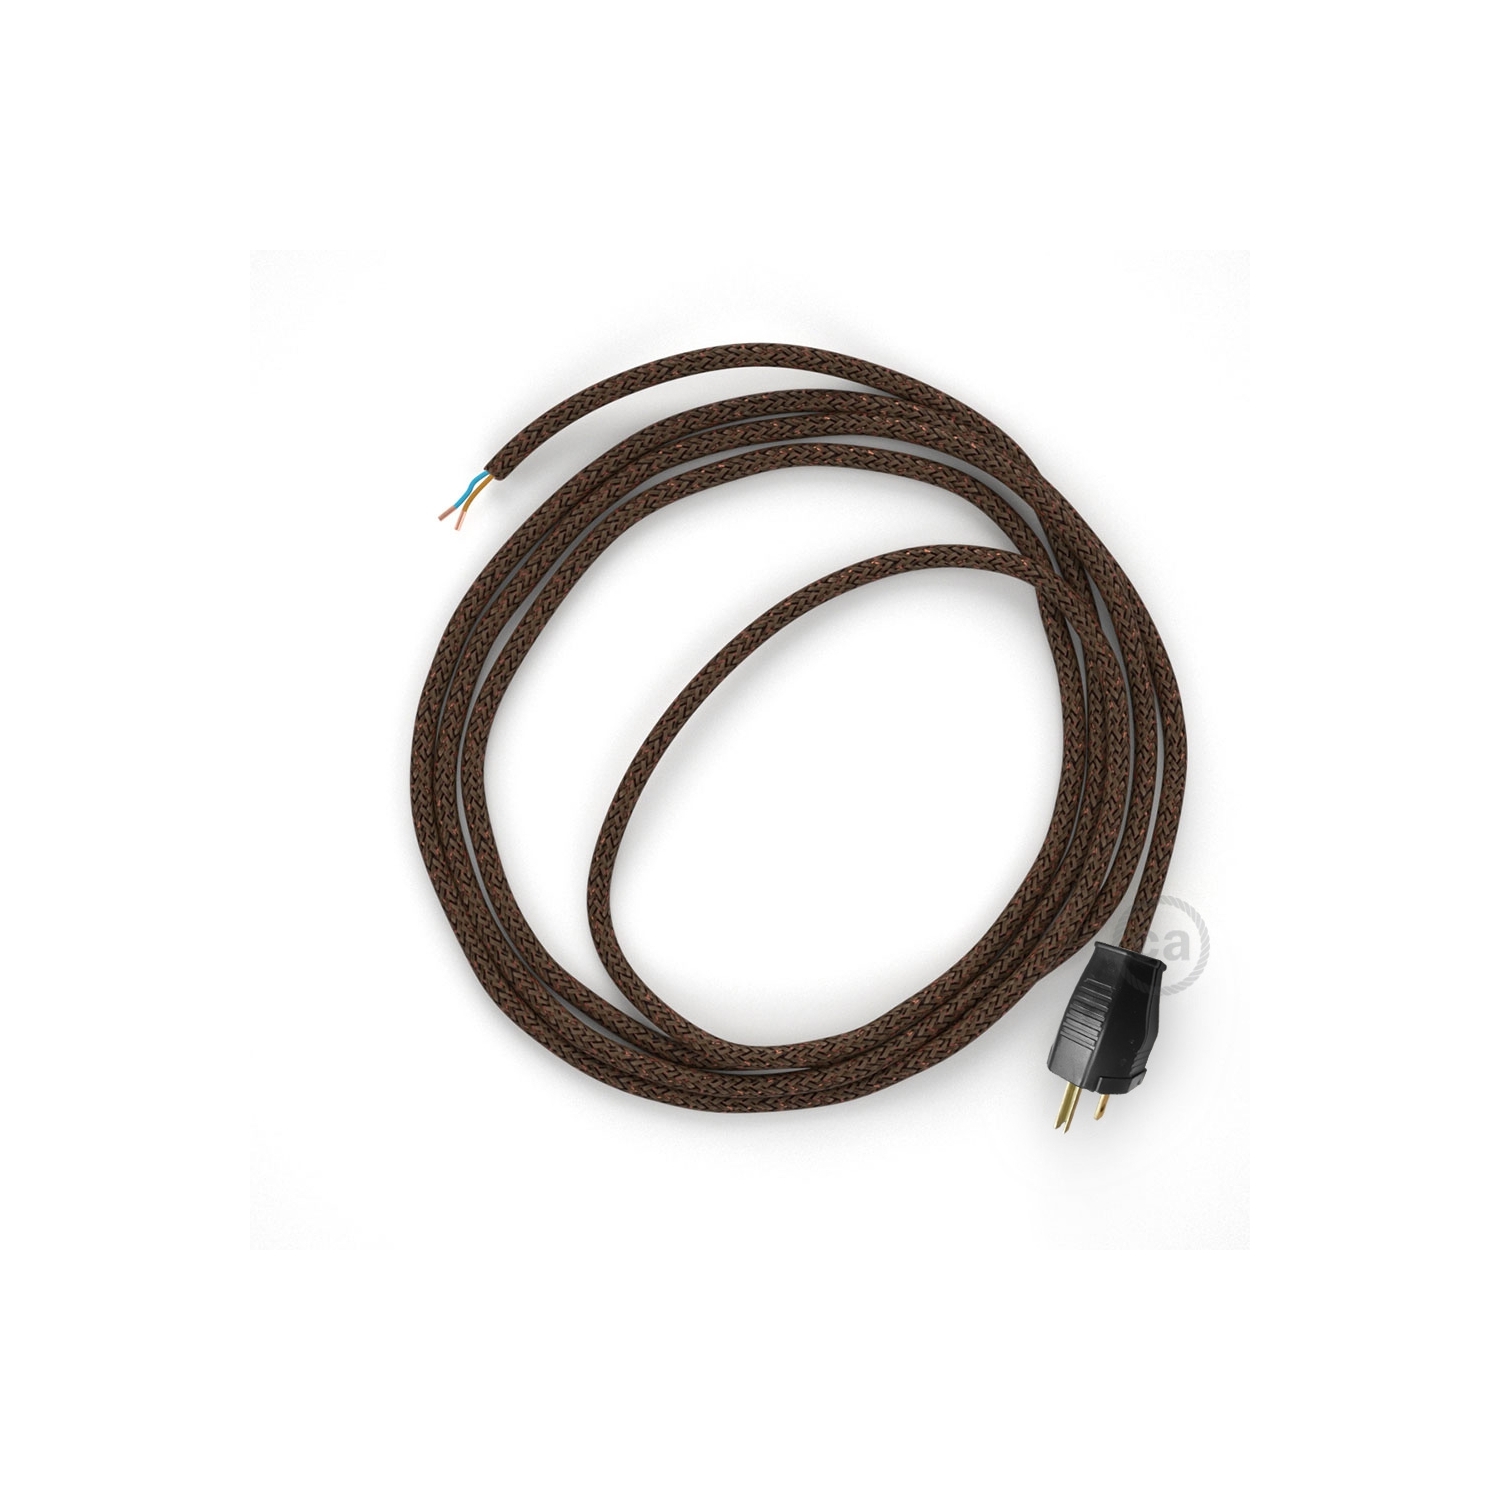 Cord-set - RL13 Brown Glitter Covered Round Cable